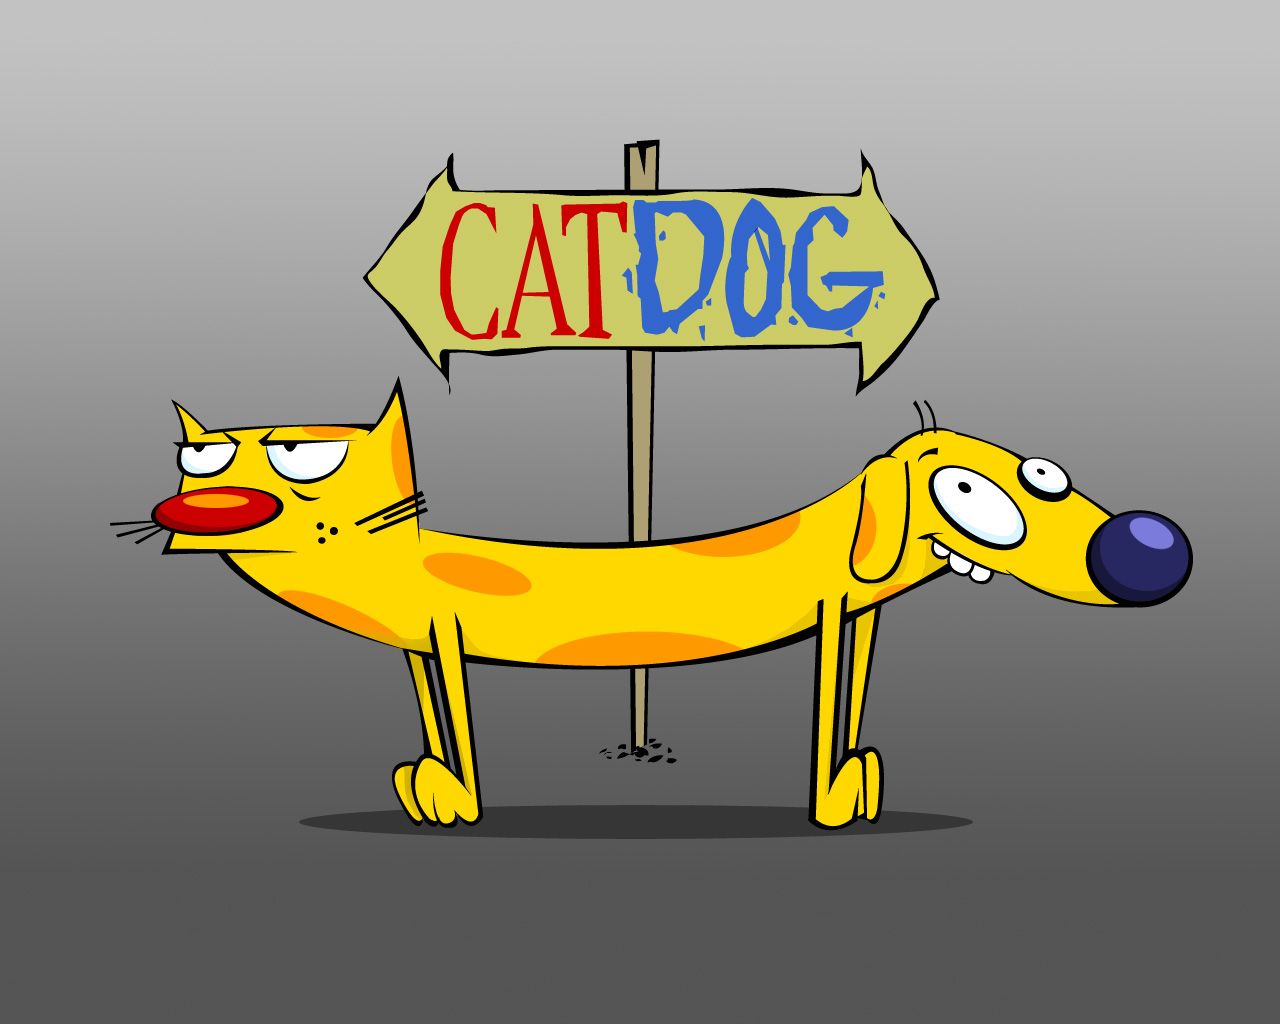 Free Picture Of Cartoon Dogs And Cats, Download Free Clip Art, Free Clip Art on Clipart Library